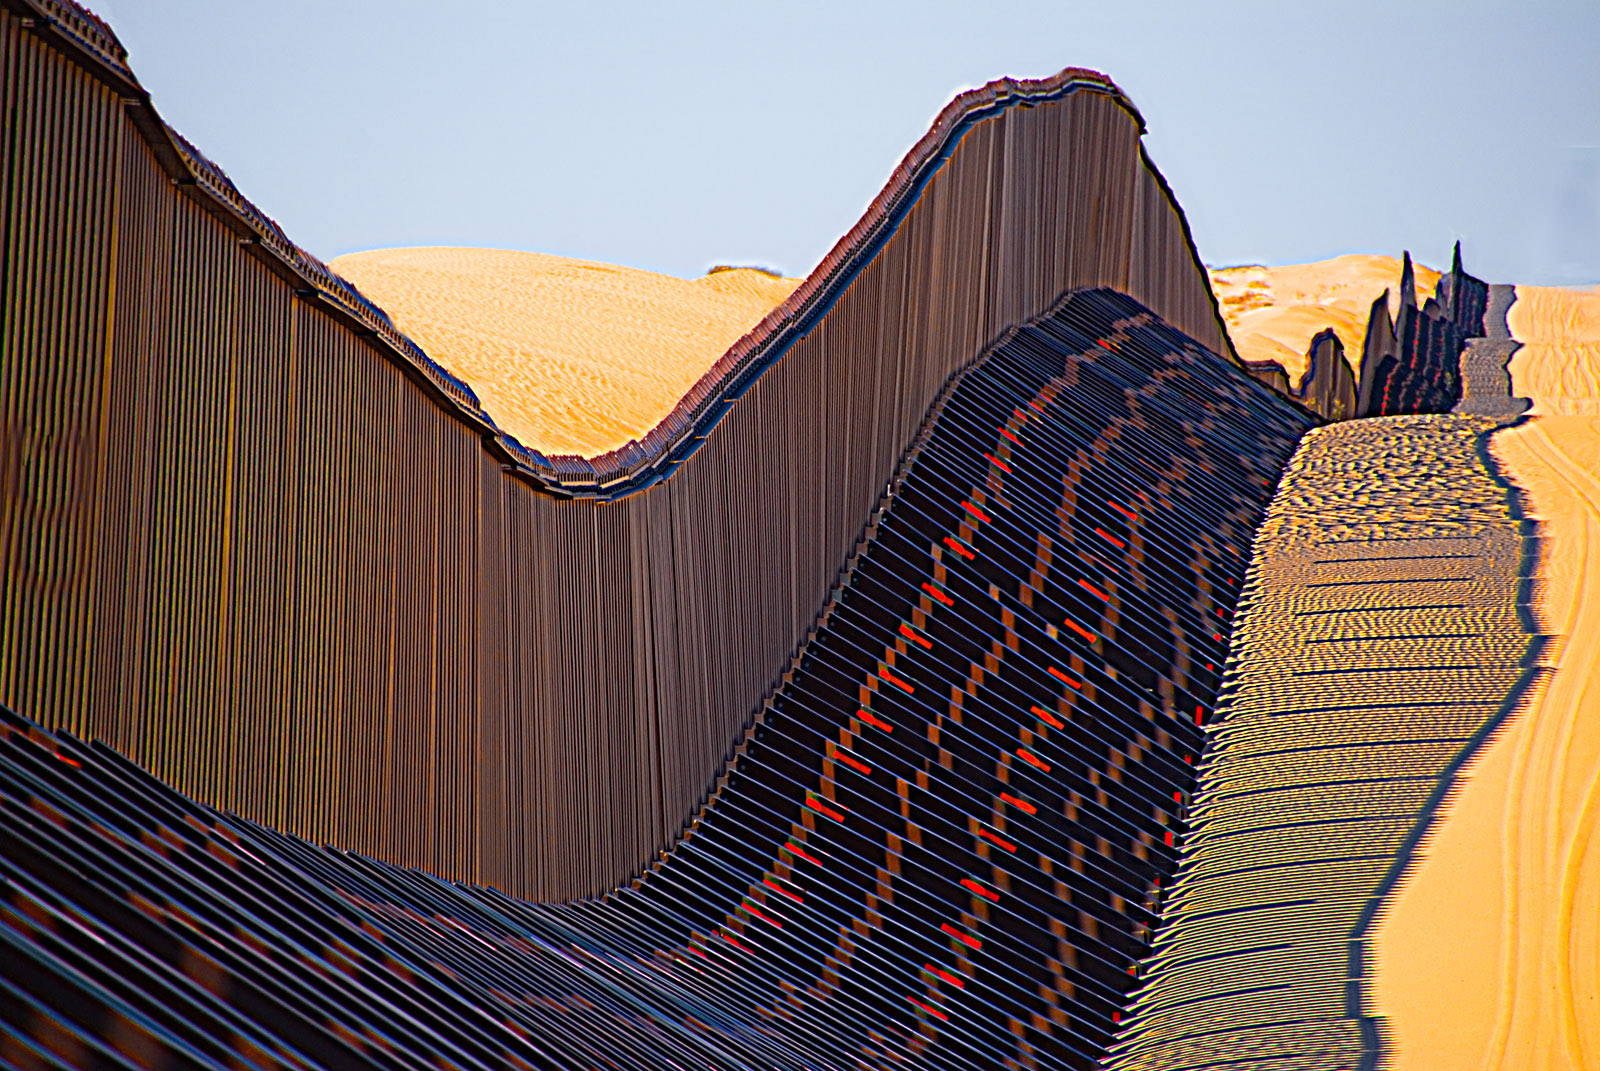 A high-tech adjustable section of the US-Mexico border fence running through the Algodones dunes in California, January 2018